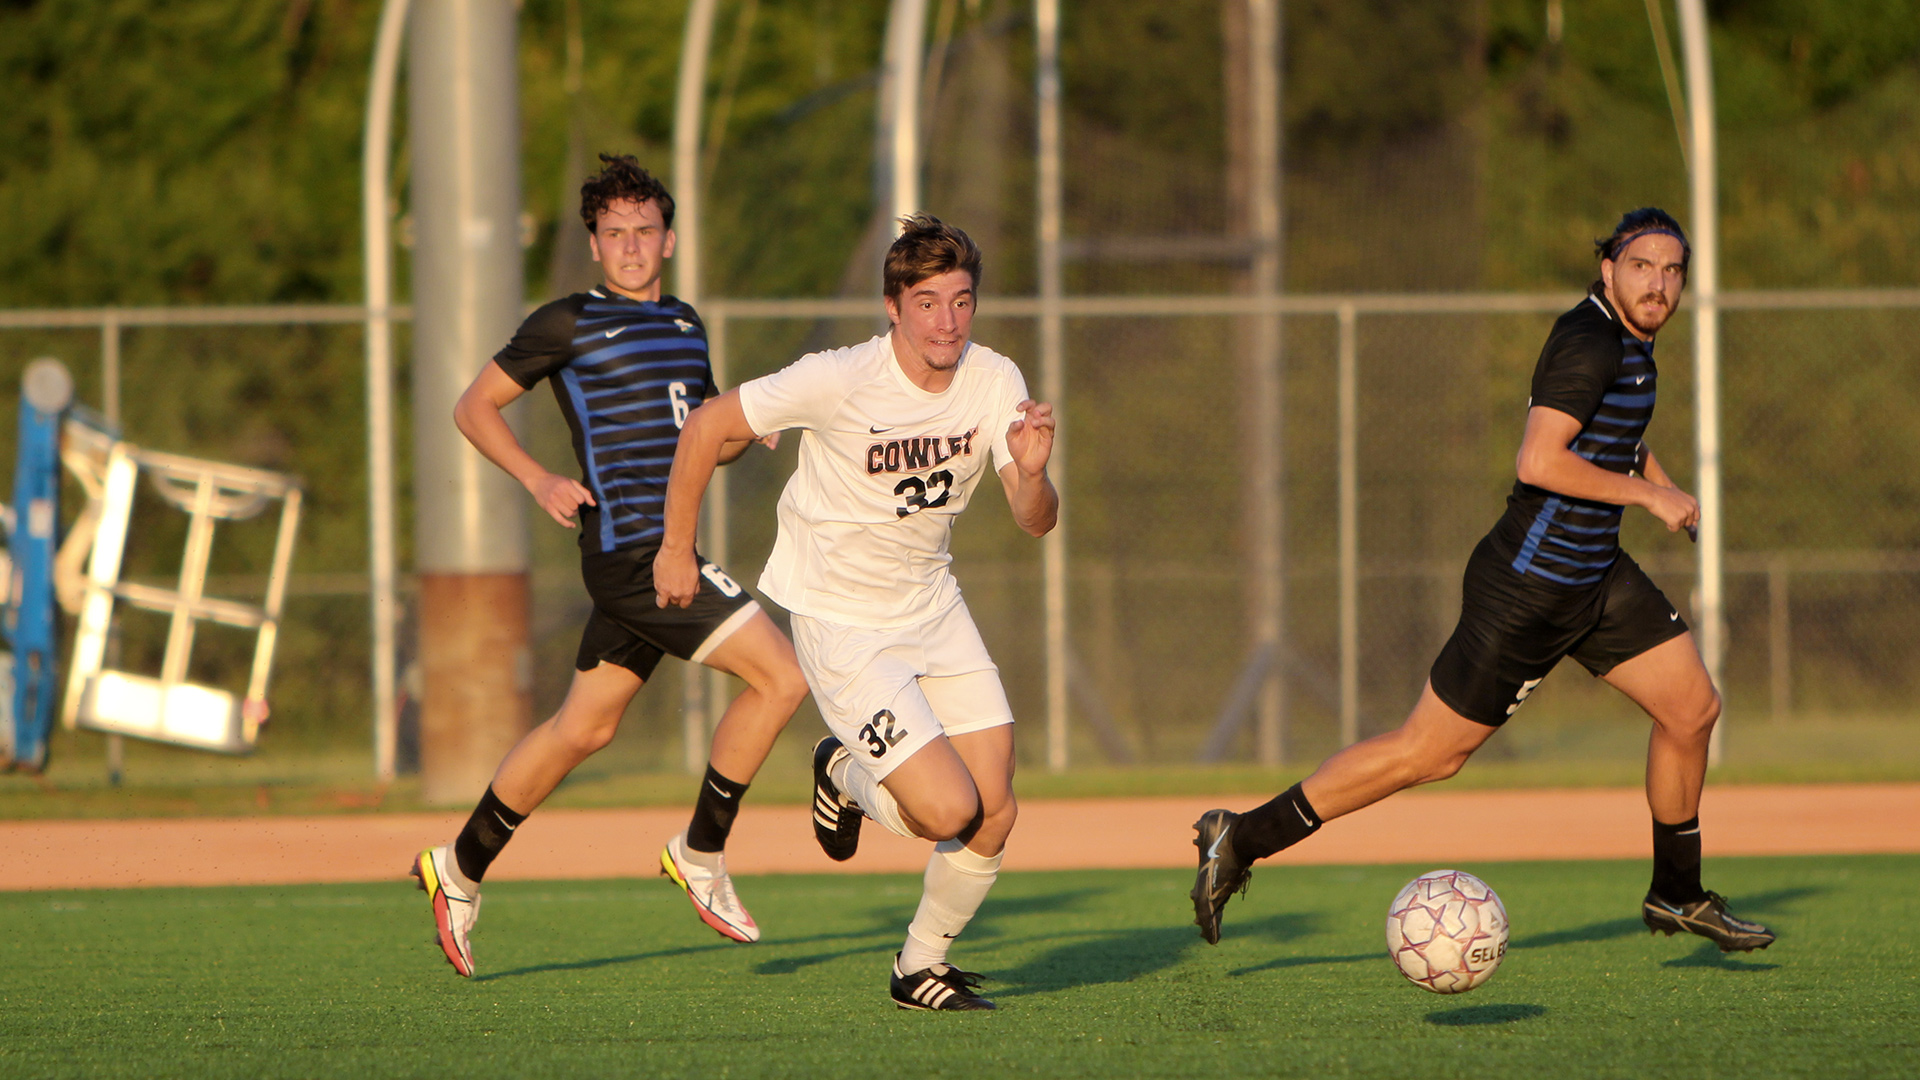 Tiger soccer team improves its record to 4-0